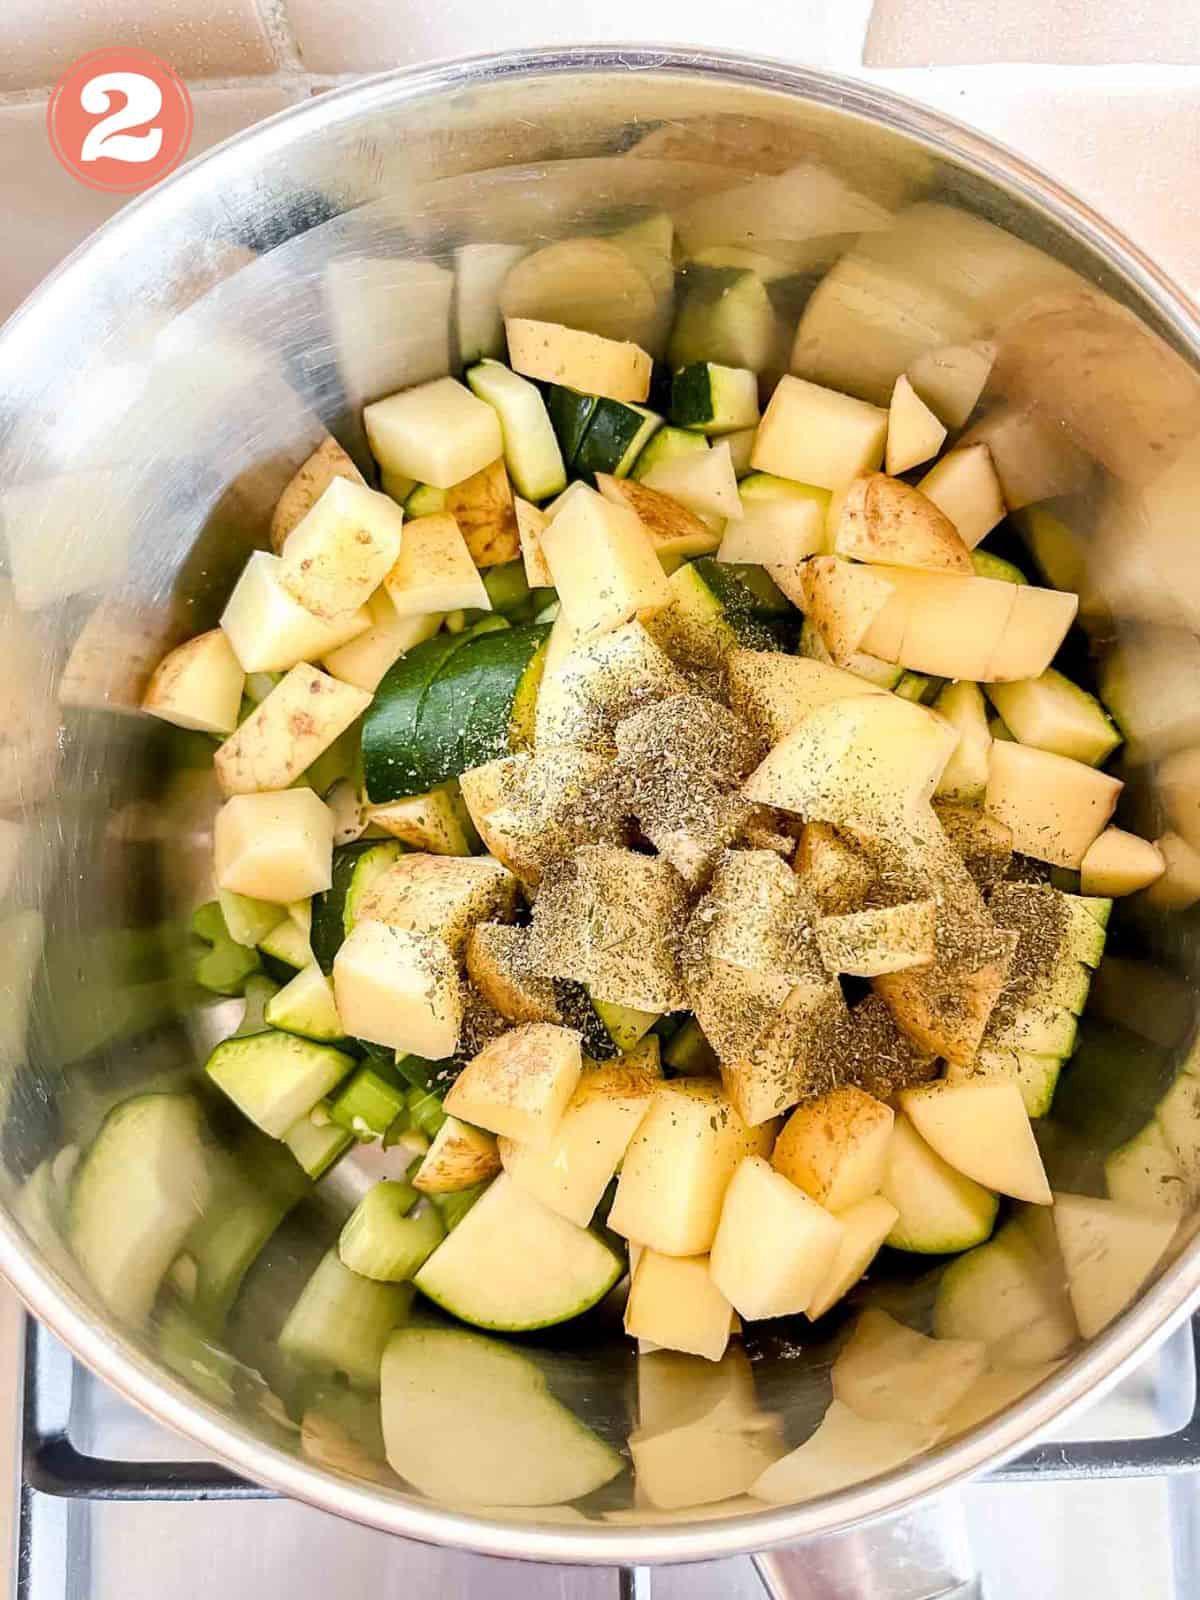 diced celery, zucchini, potato and dried herbs in a metal pot labelled number two.